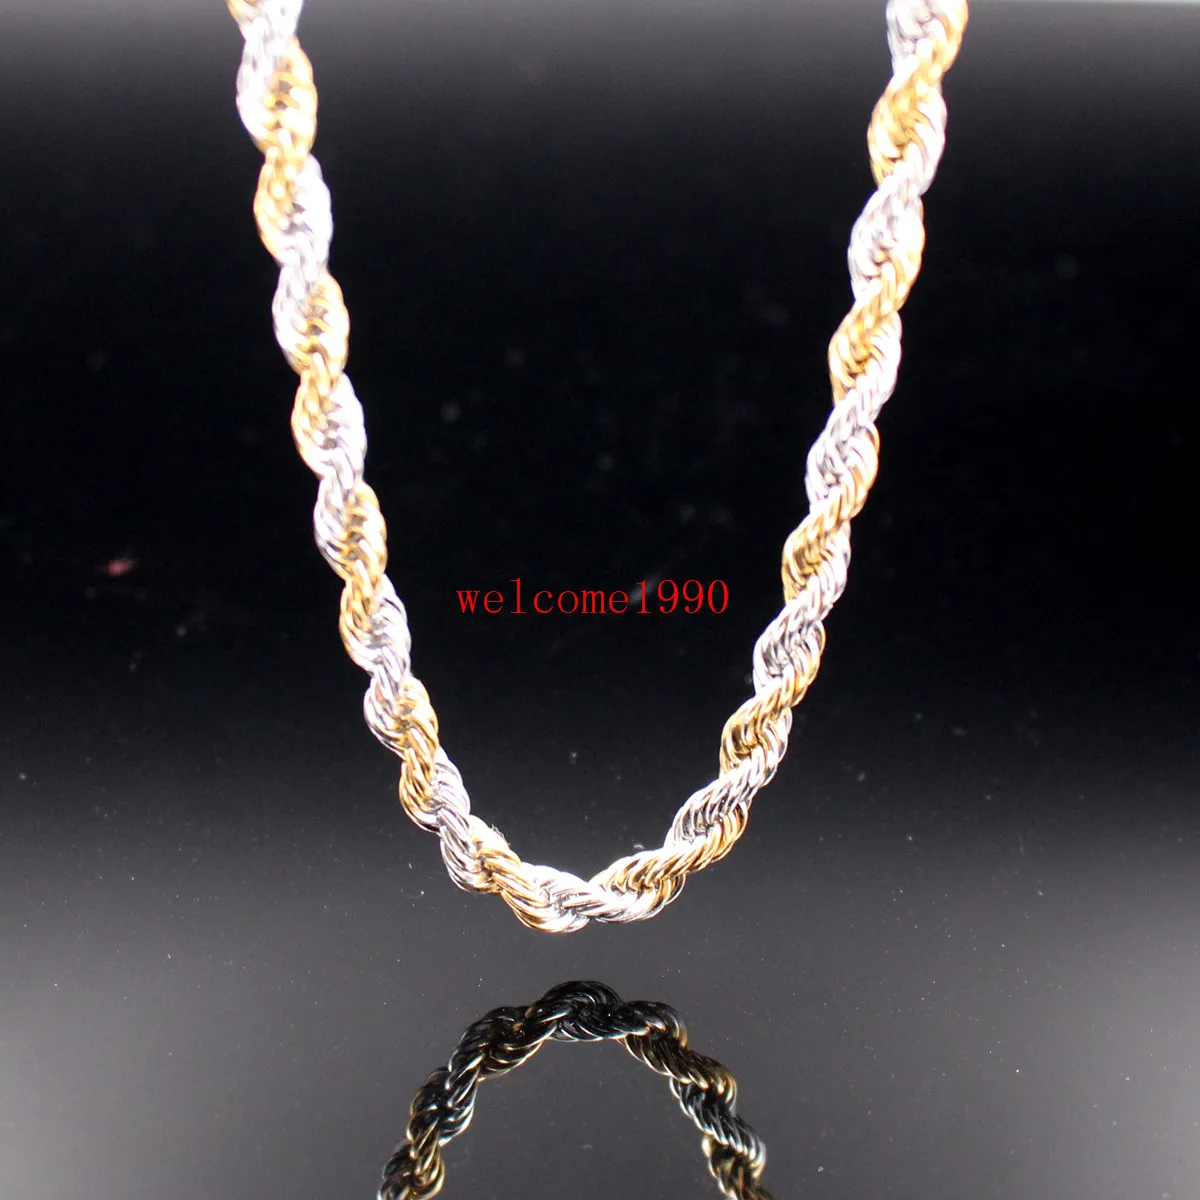 24 inch 5mm 6mm Gold Silver Stainless Steel ed singapore chain Rope Chain Link Necklaces Women Men Brand New227D5966393